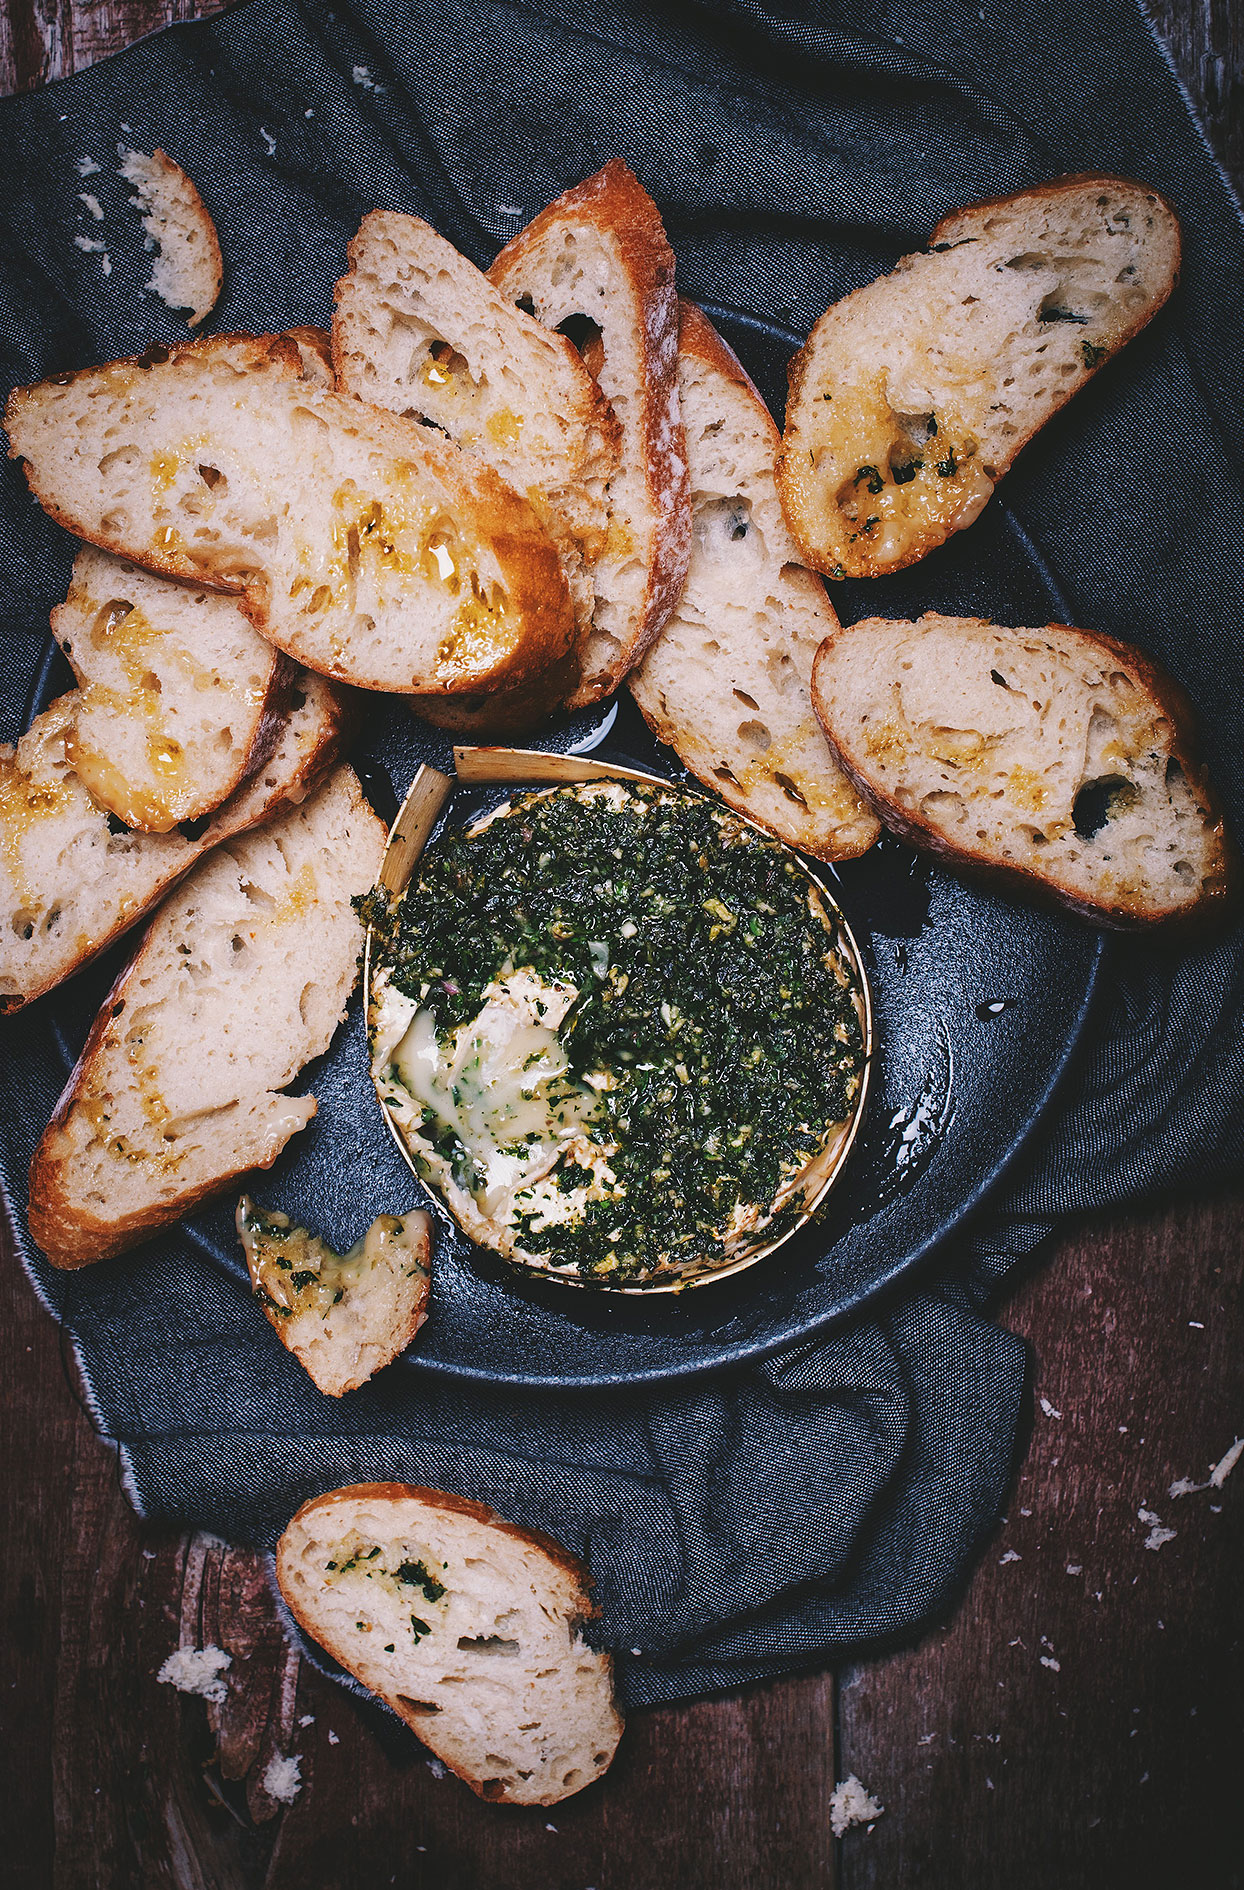 Melting camembert with fine herbs